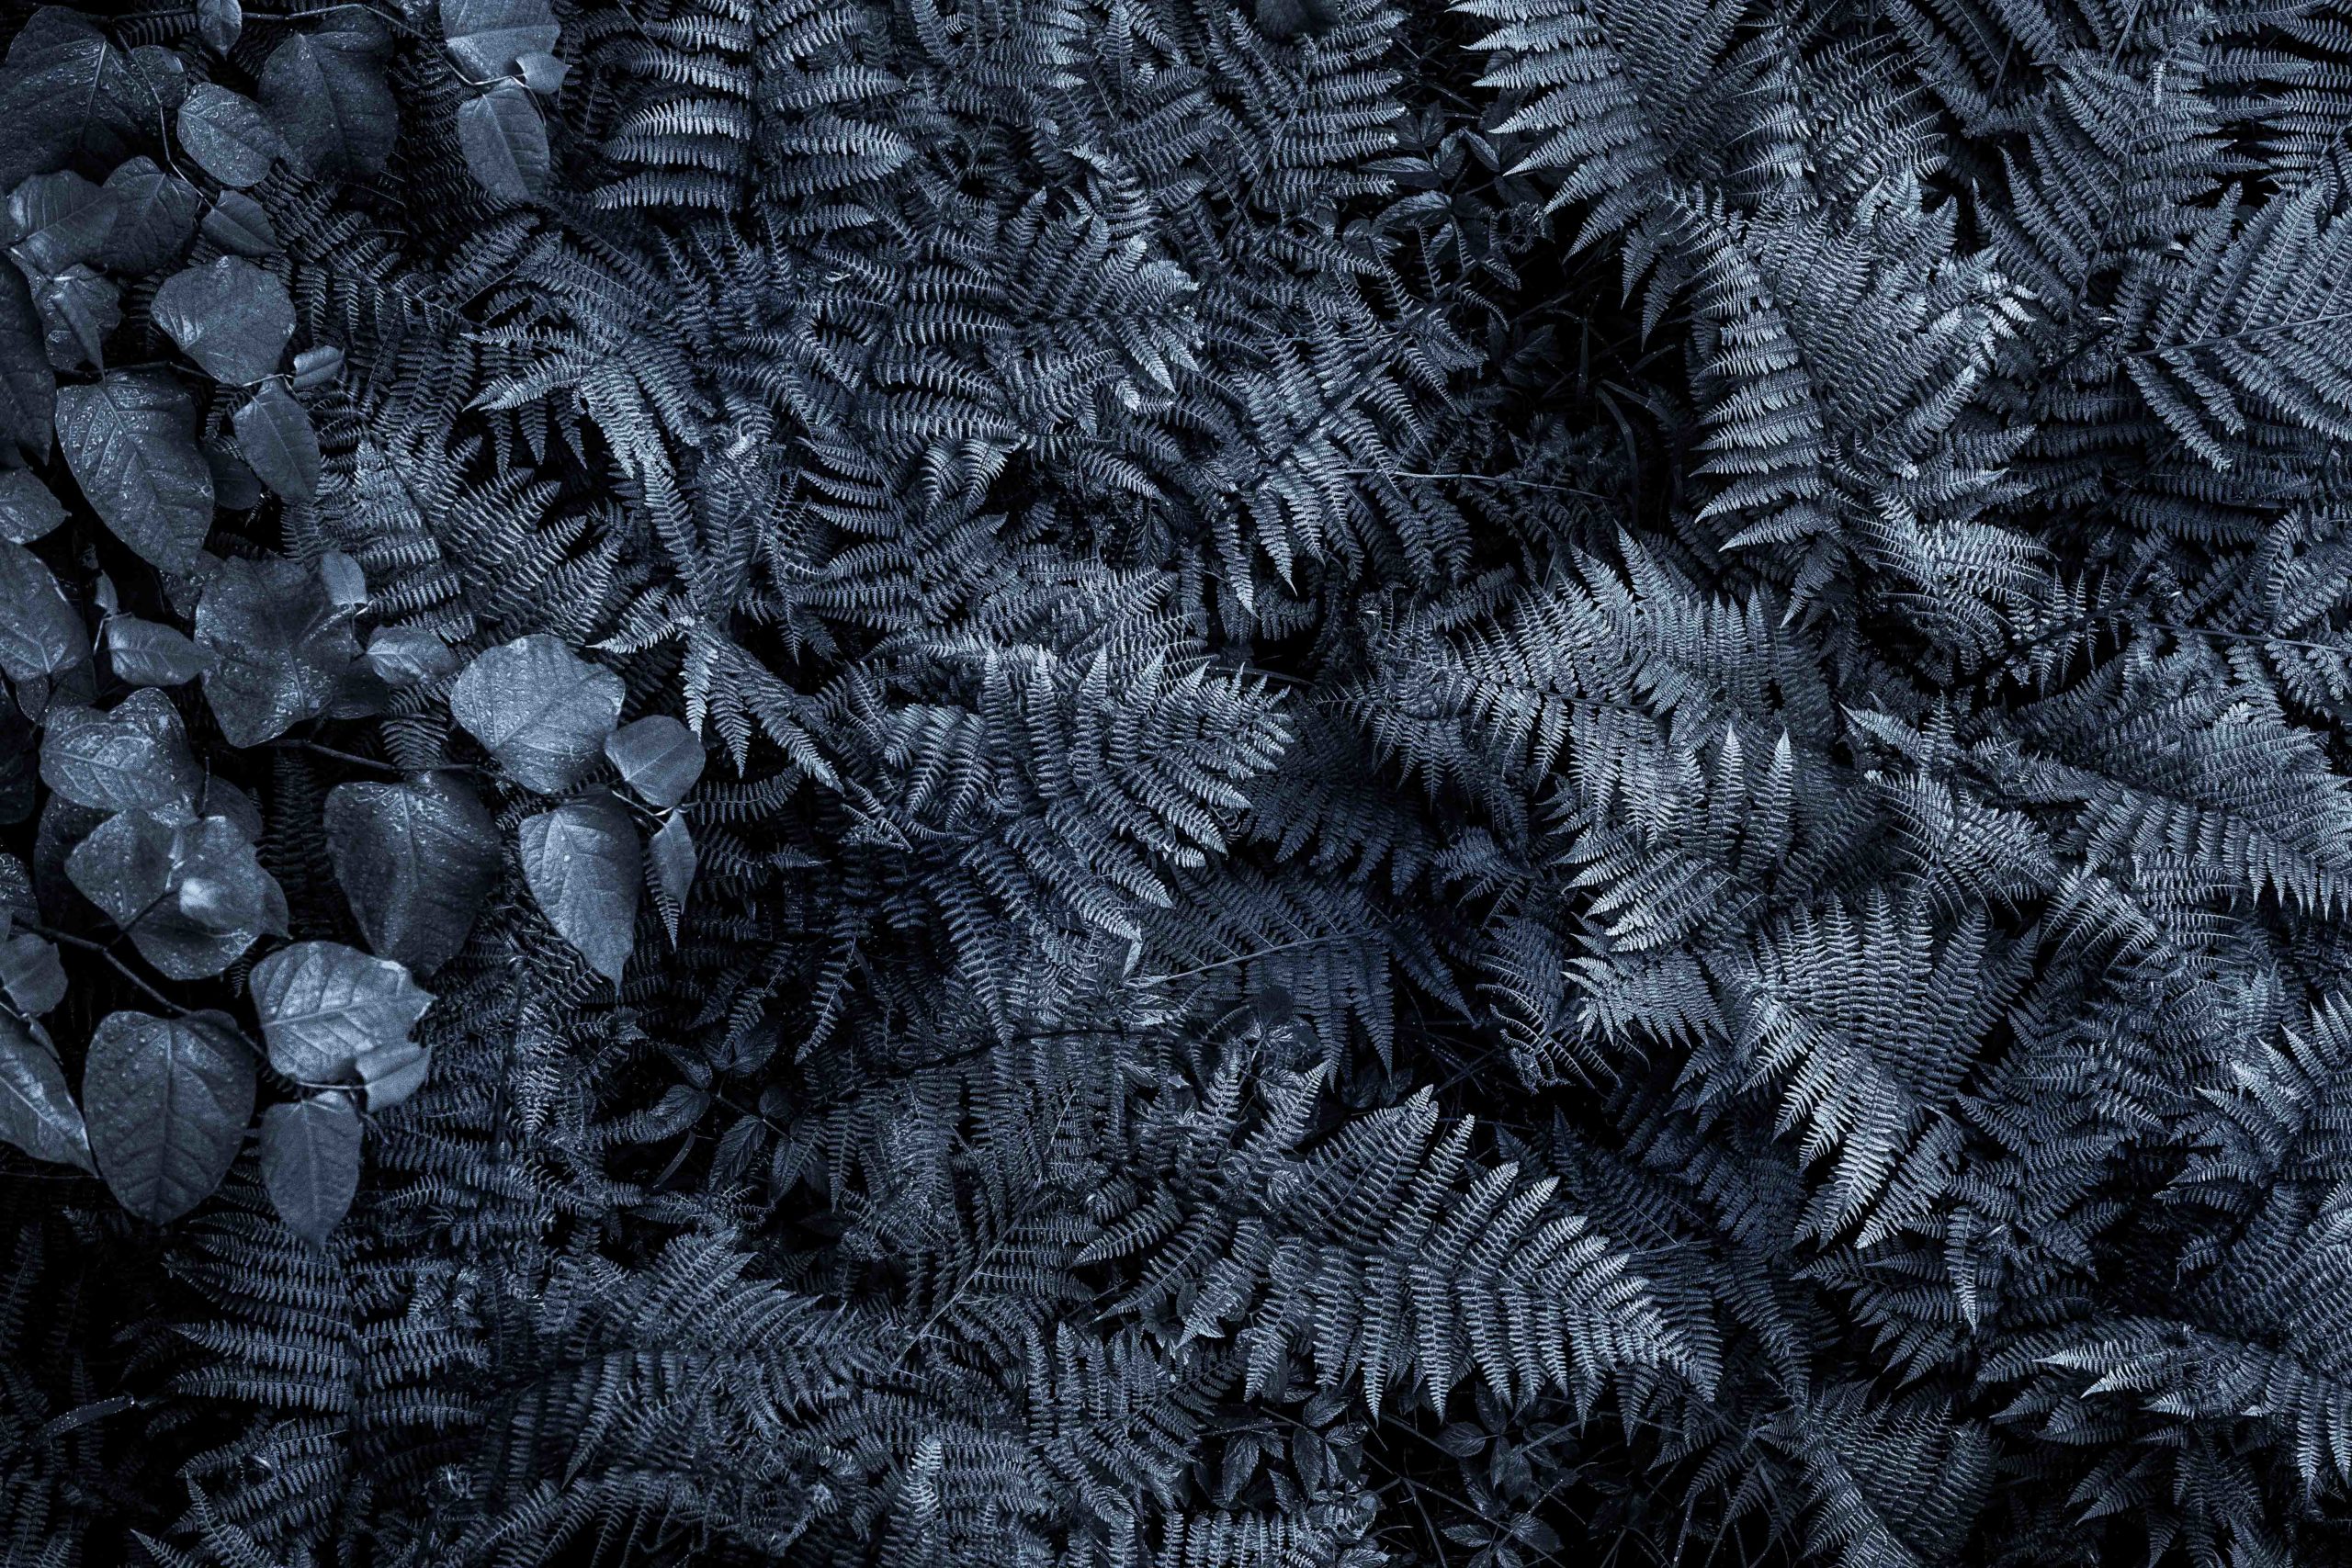 Abstract landscape photography looking down on a cluster of ferns and other plants in the forest